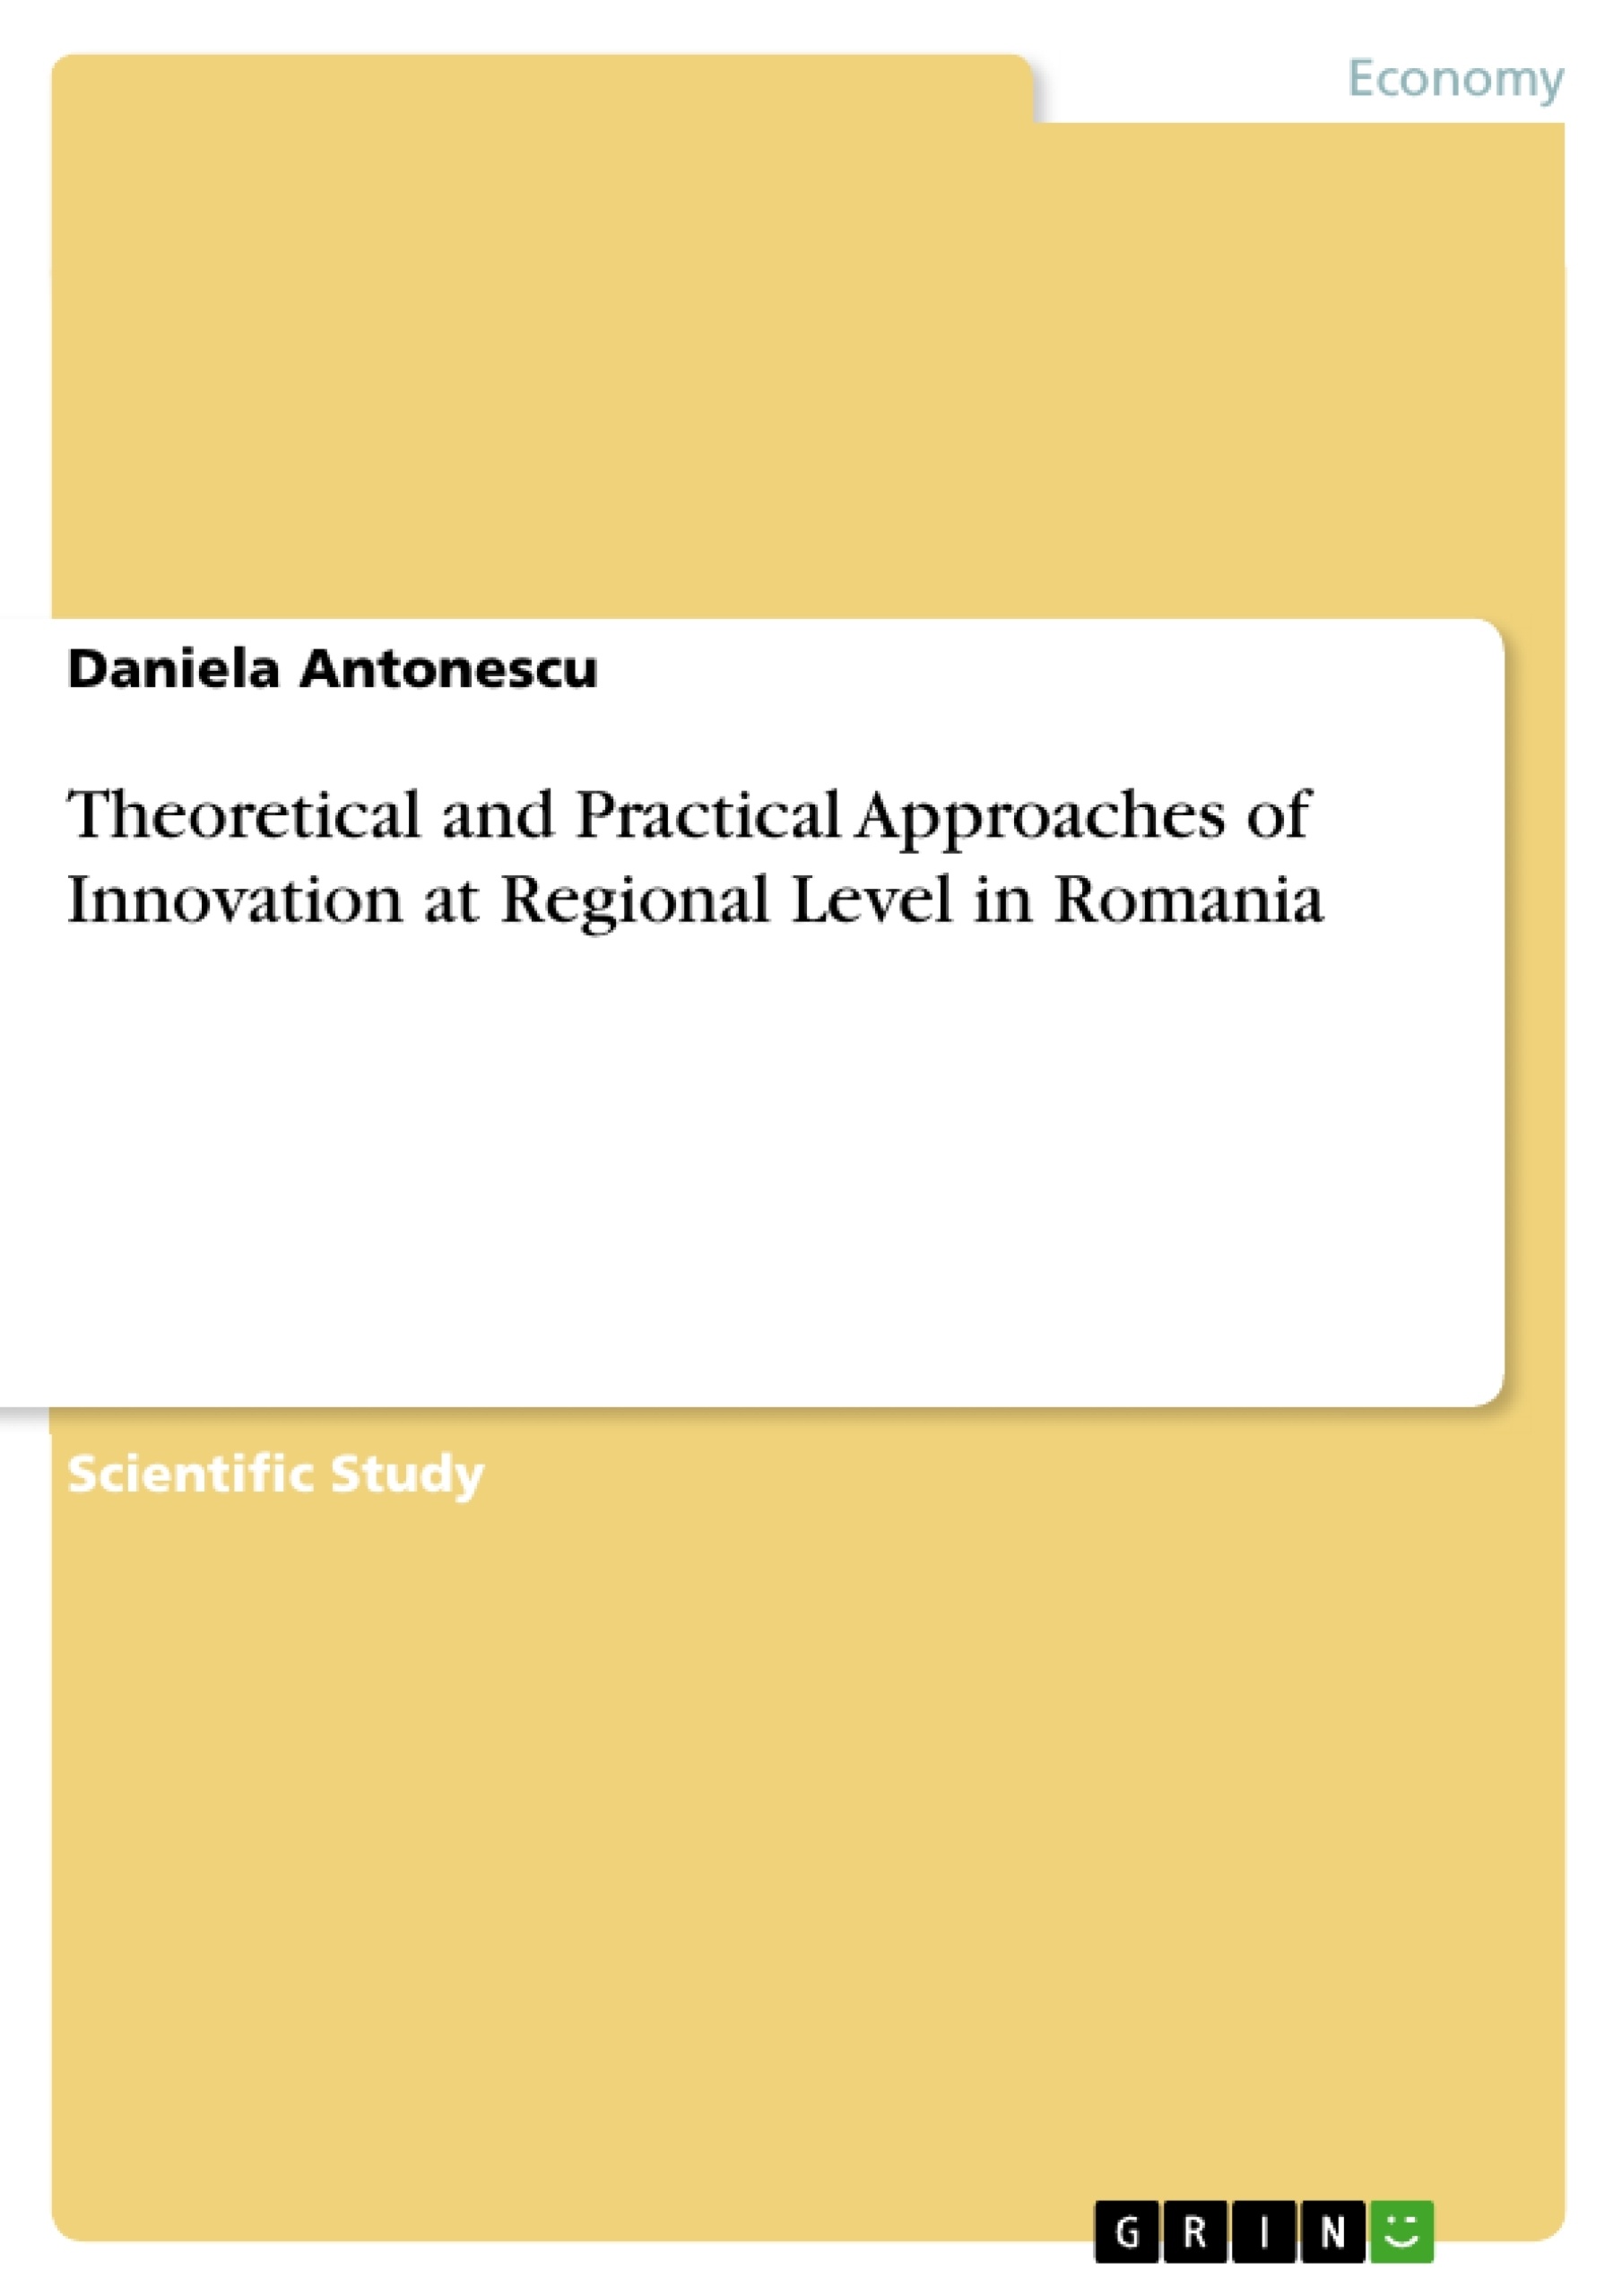 Titre: Theoretical and Practical Approaches of Innovation at Regional Level in Romania